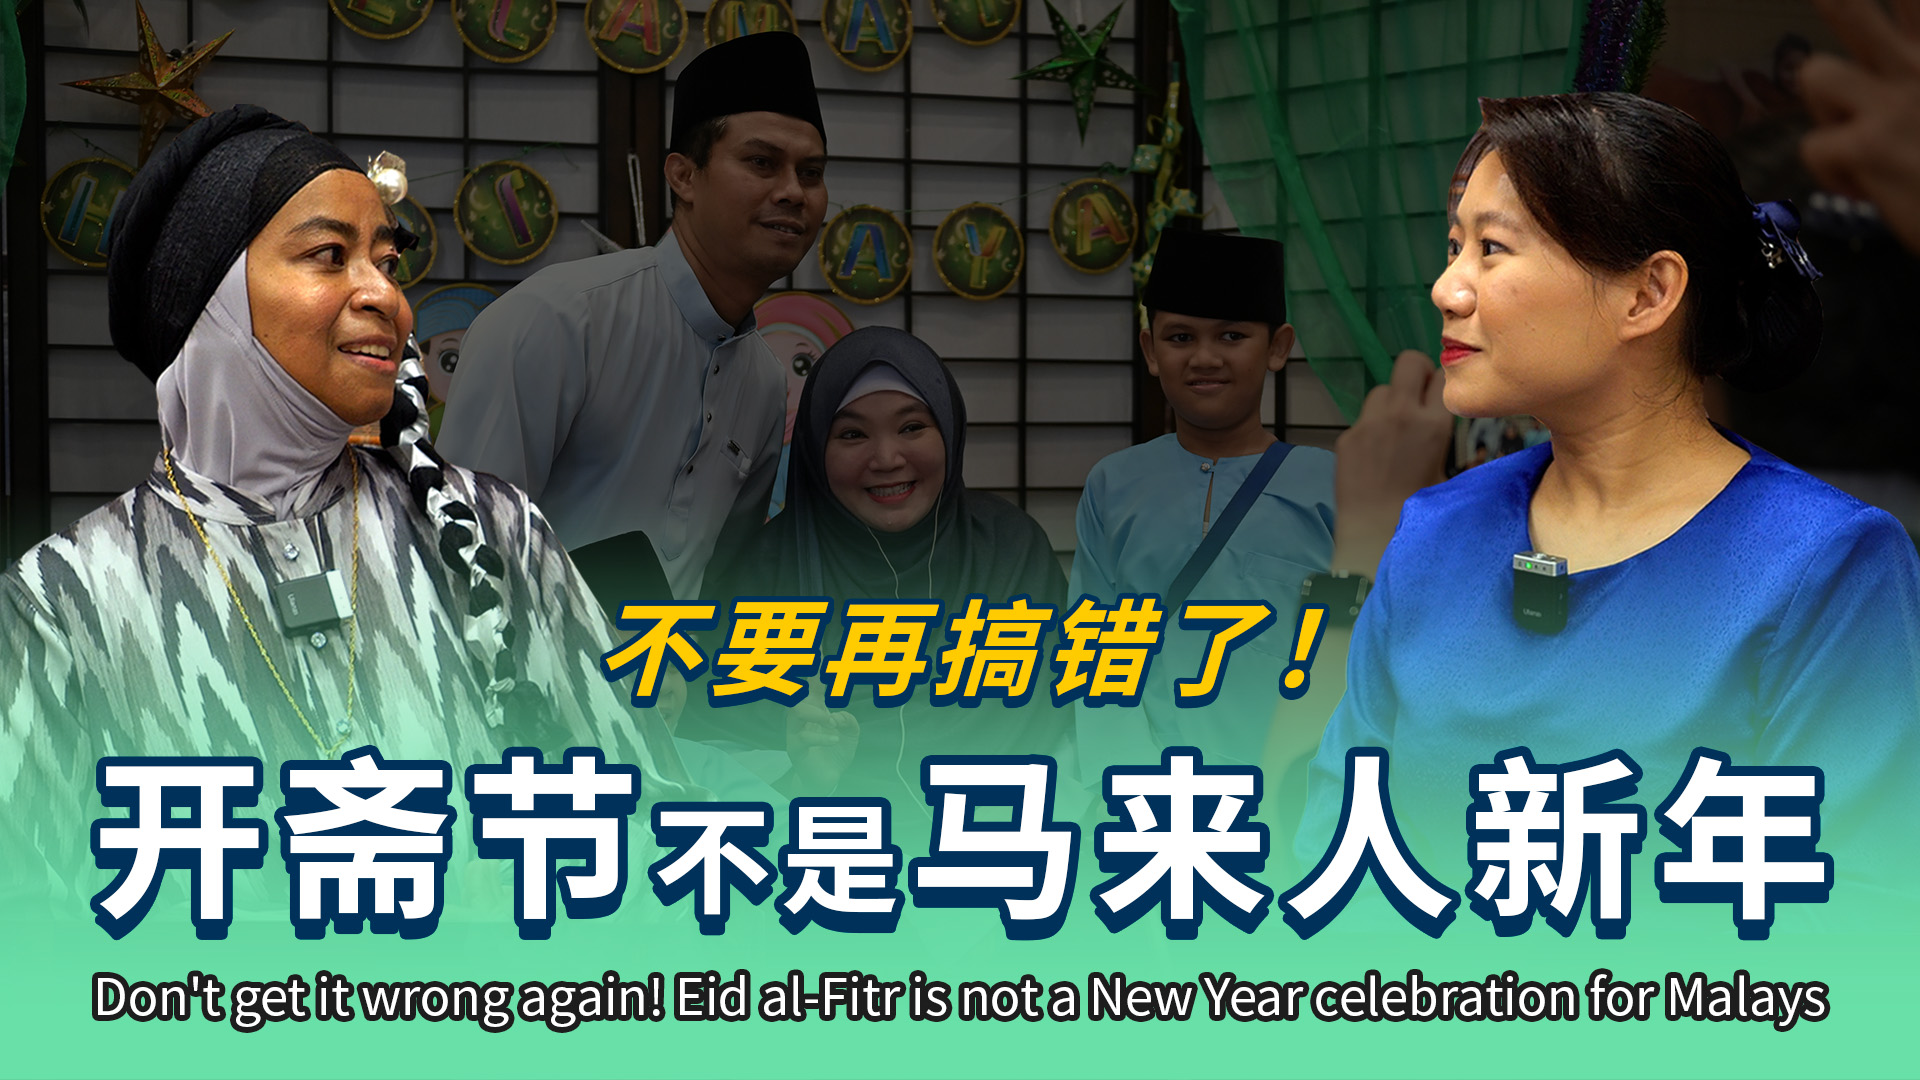 Chinese people preparing for Hari Raya celebration? What is going on? 